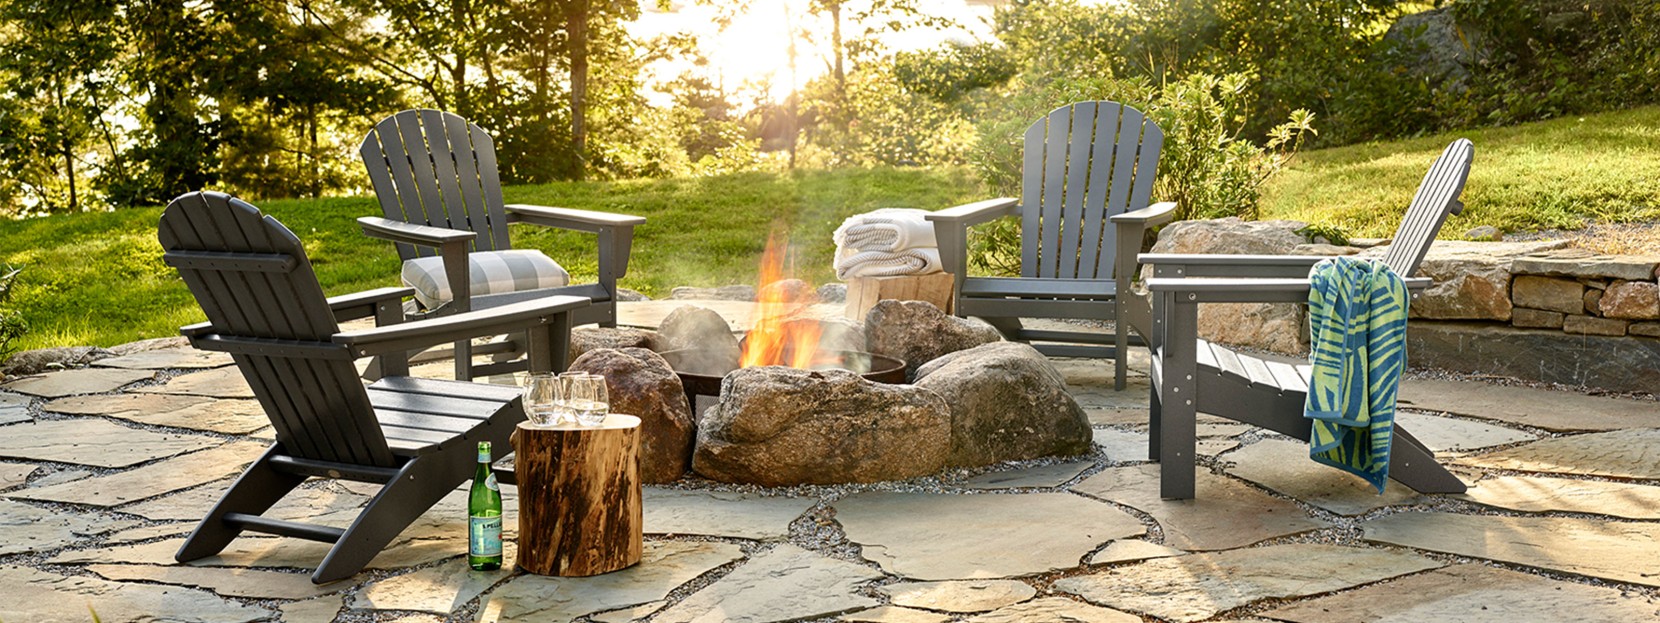 Beautiful backyard patio scene with adirondack chairs around a firepit, sun setting in the background.